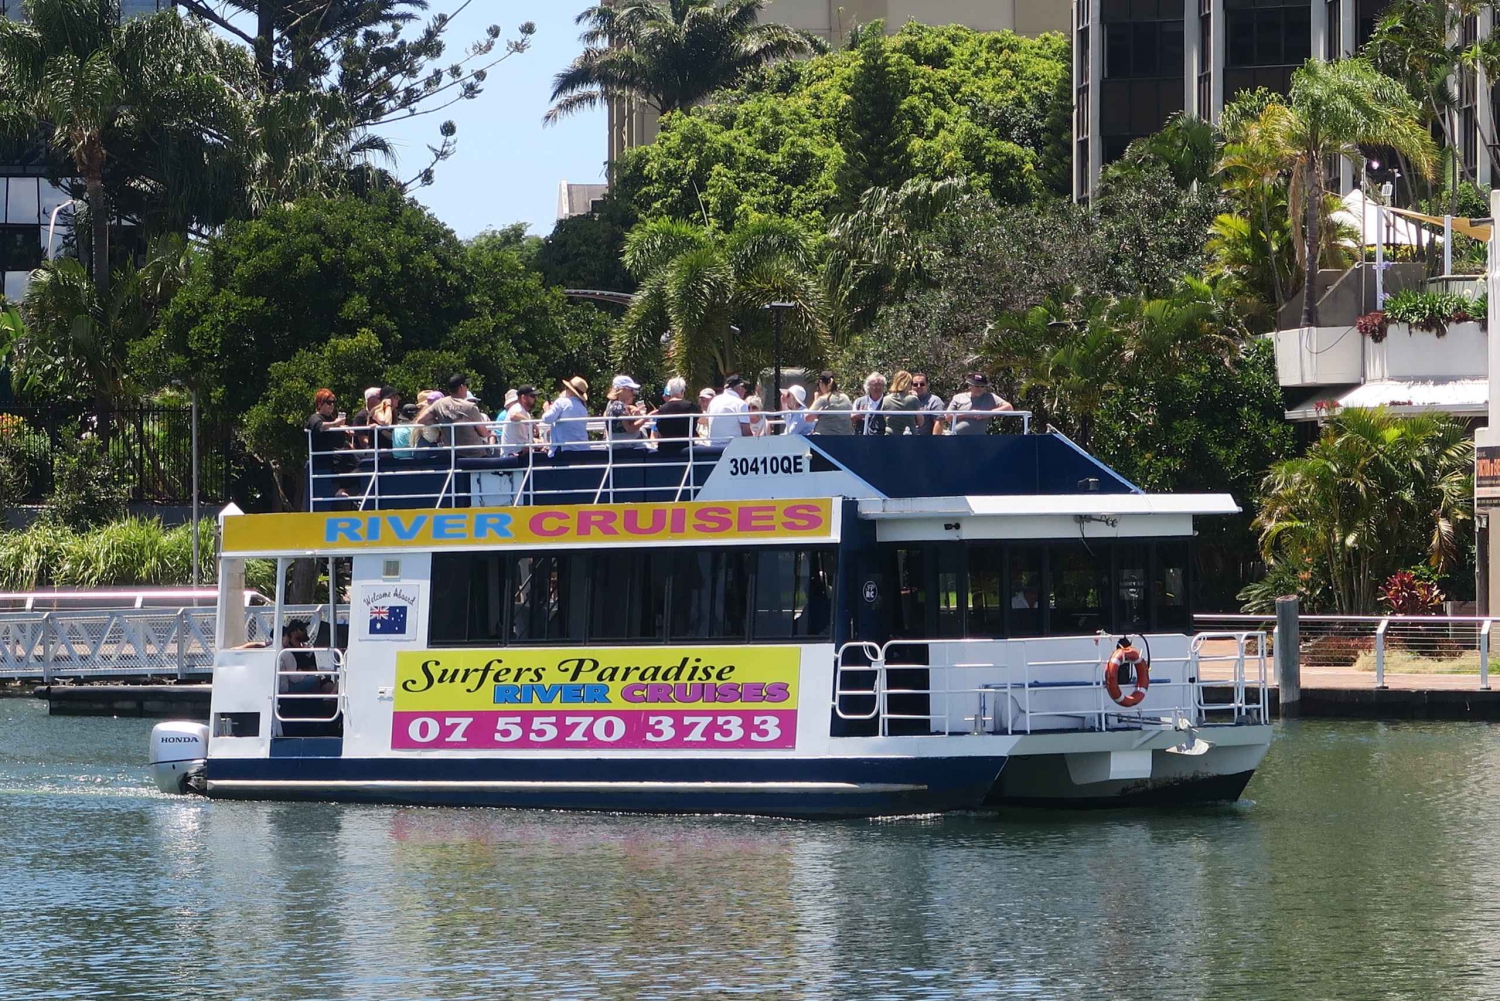 Surfers Paradise: Gold Coast Afternoon River Cruise kl. 16